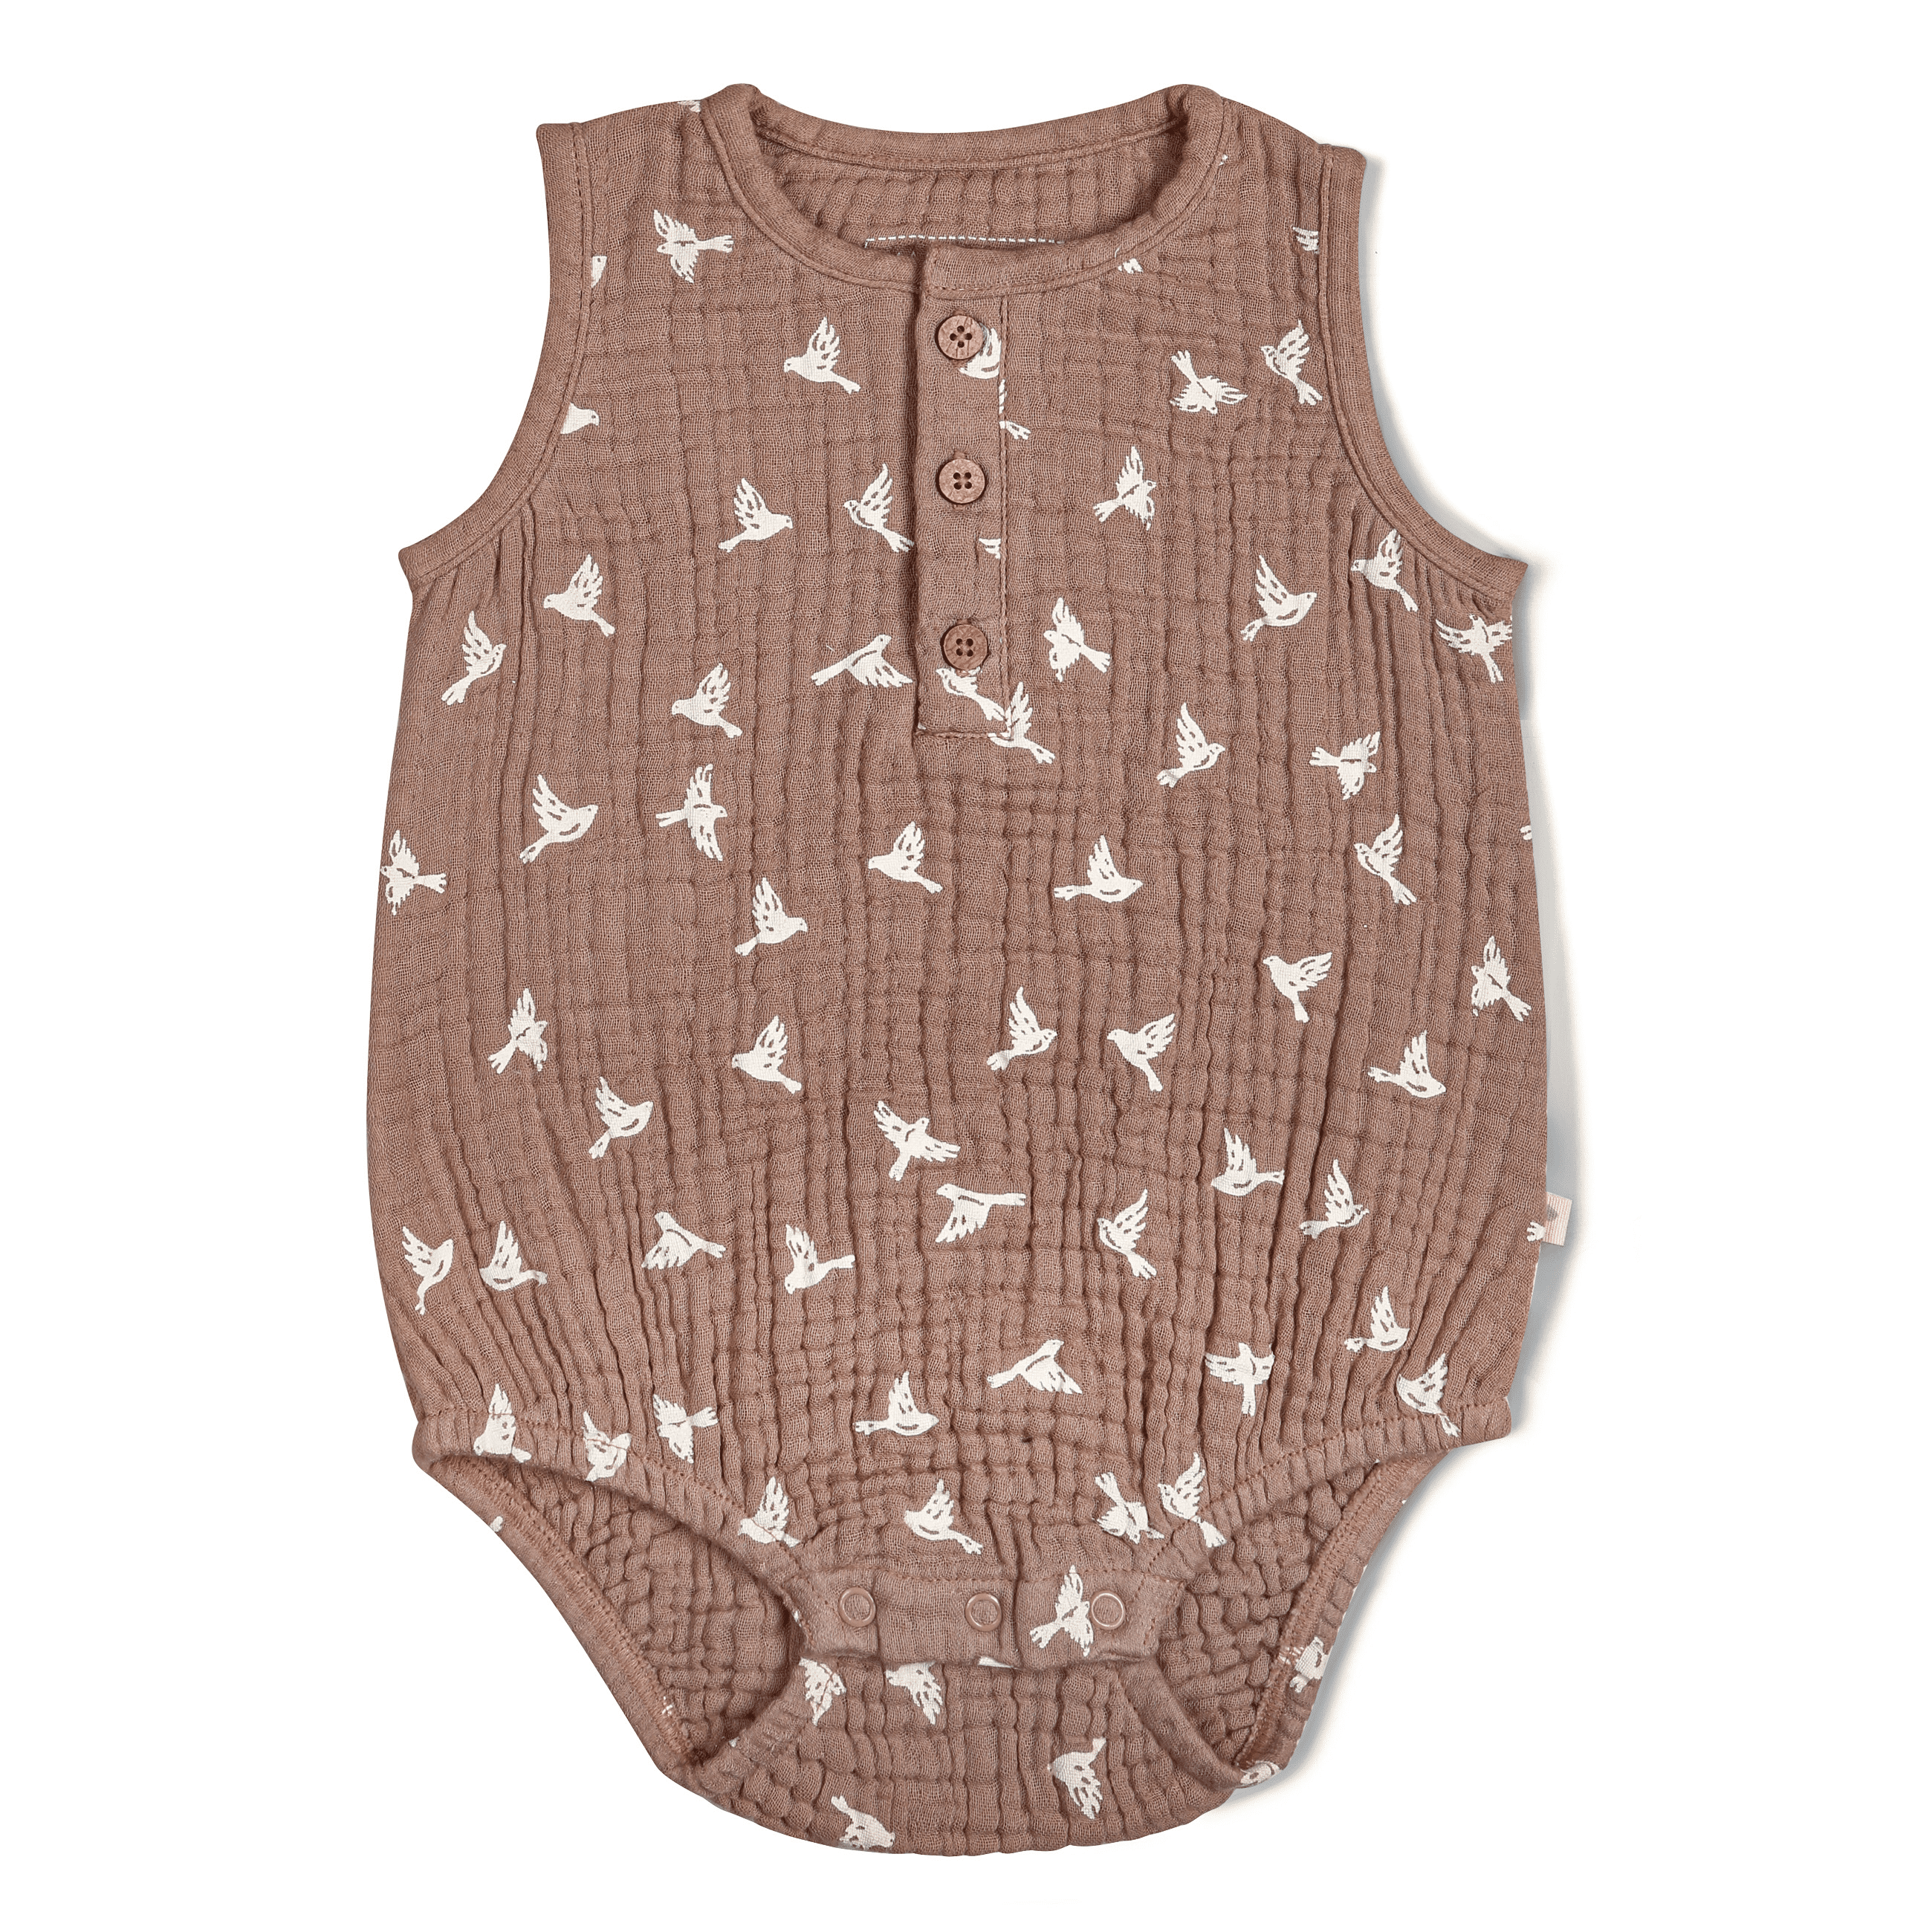 A sleeveless textured toddler romper in light brown color, featuring an all-over white bird print, laid flat on a white background.